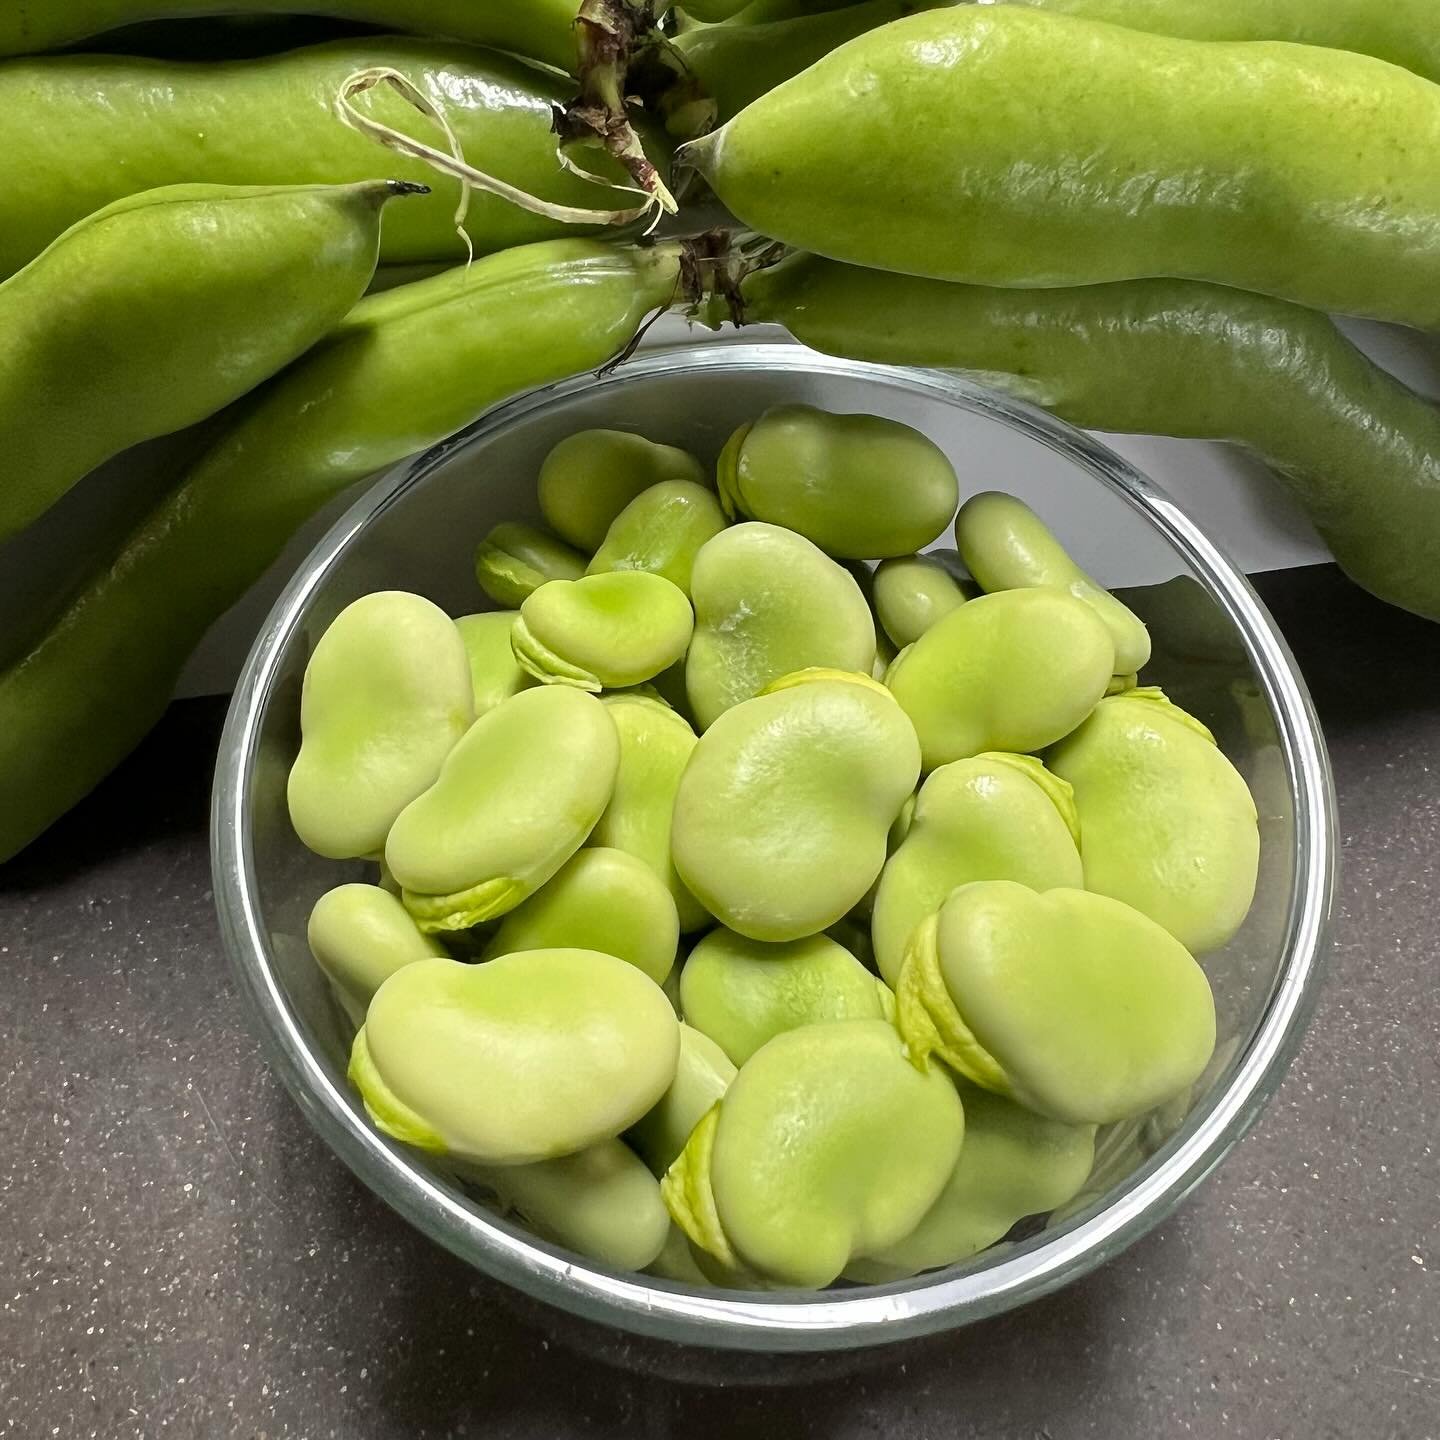 Product Announcement! Fava Beans are here! Time to stock up, they are first come first serve. You can call at the end of the day if you are looking to buy cases of them.